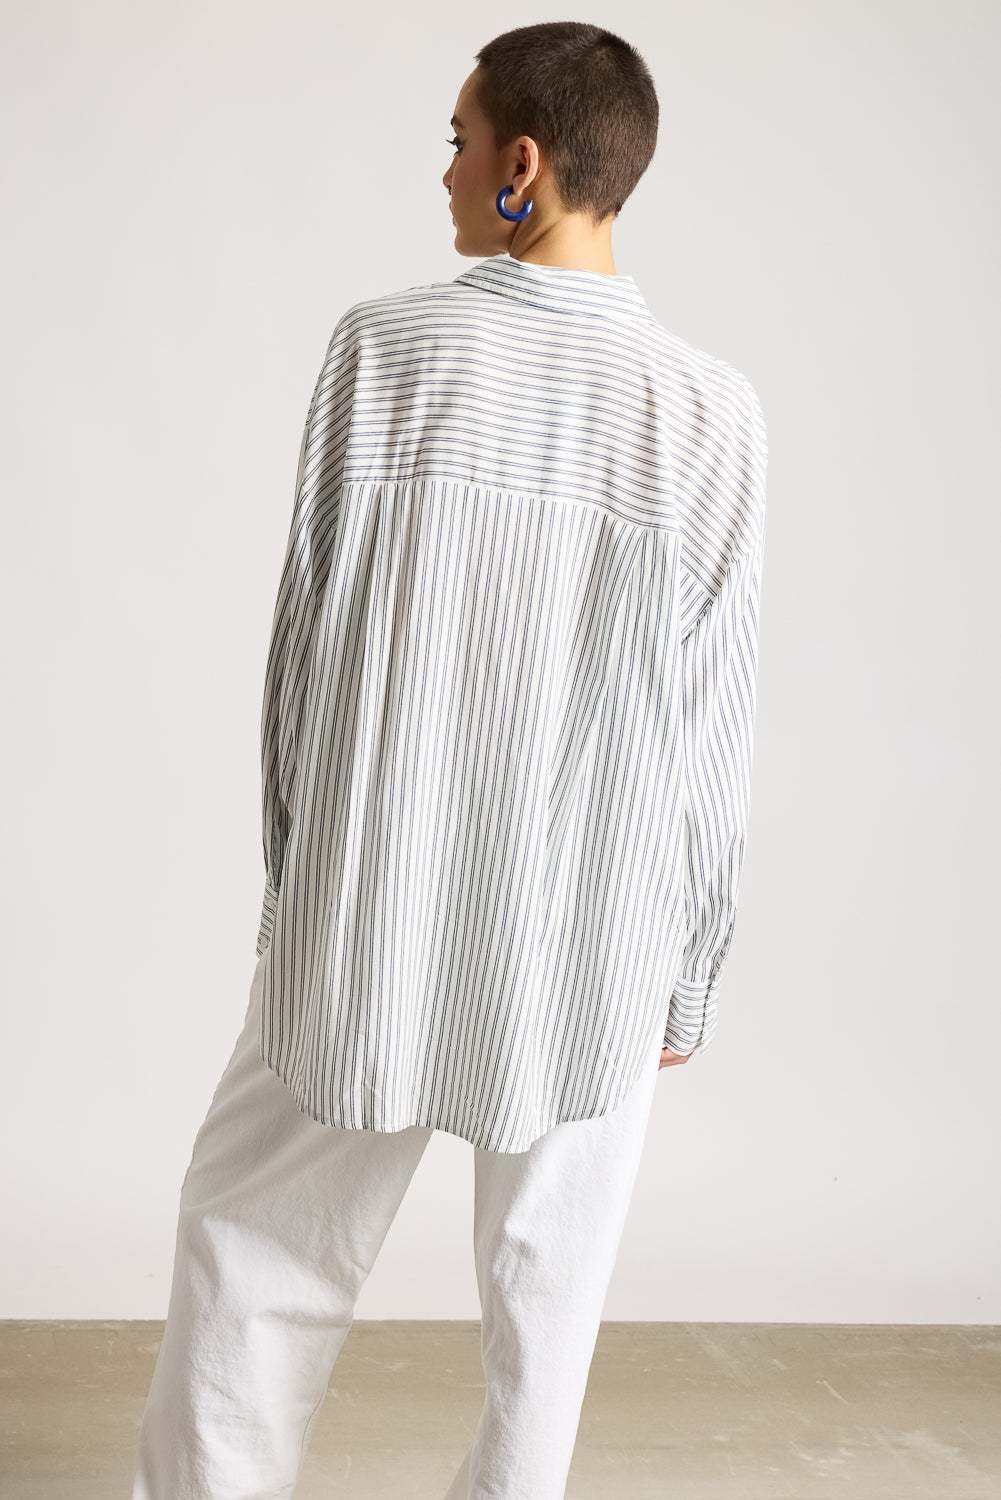 Women's Relaxed Fit Shirt - Navy Blue Stripes